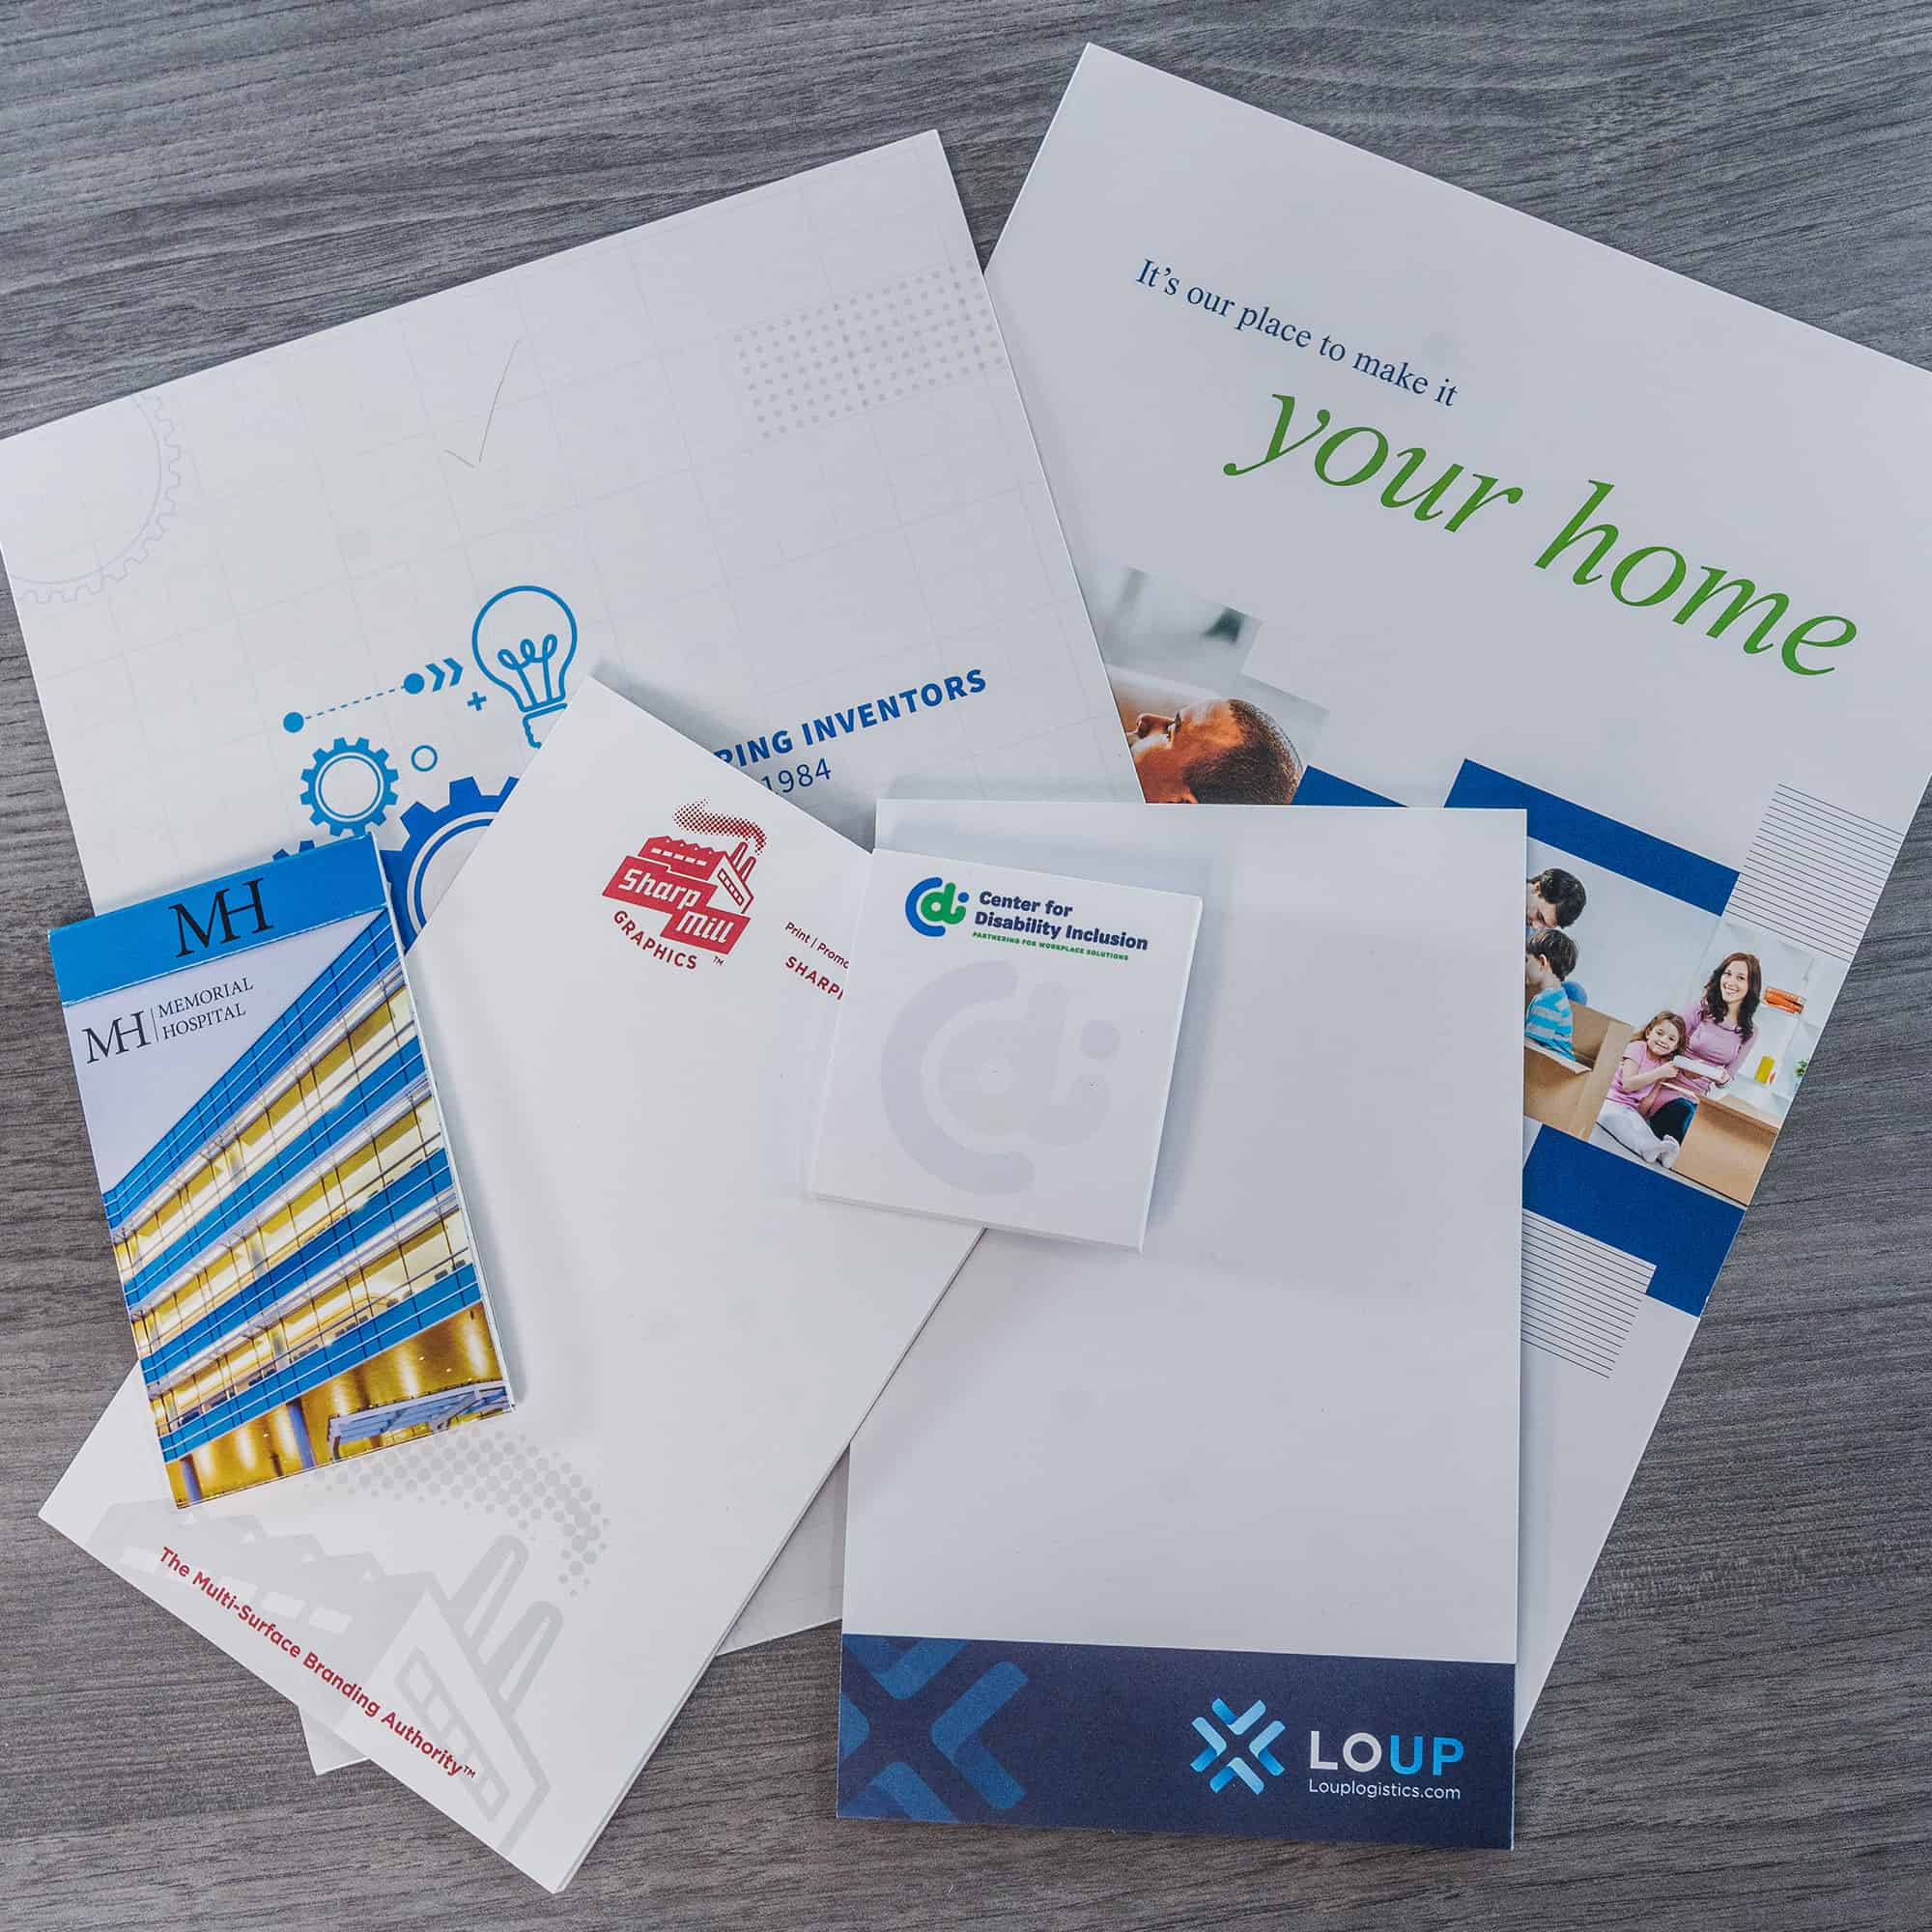 A set of business cards, letterheads, and envelopes showcasing commercial printing.